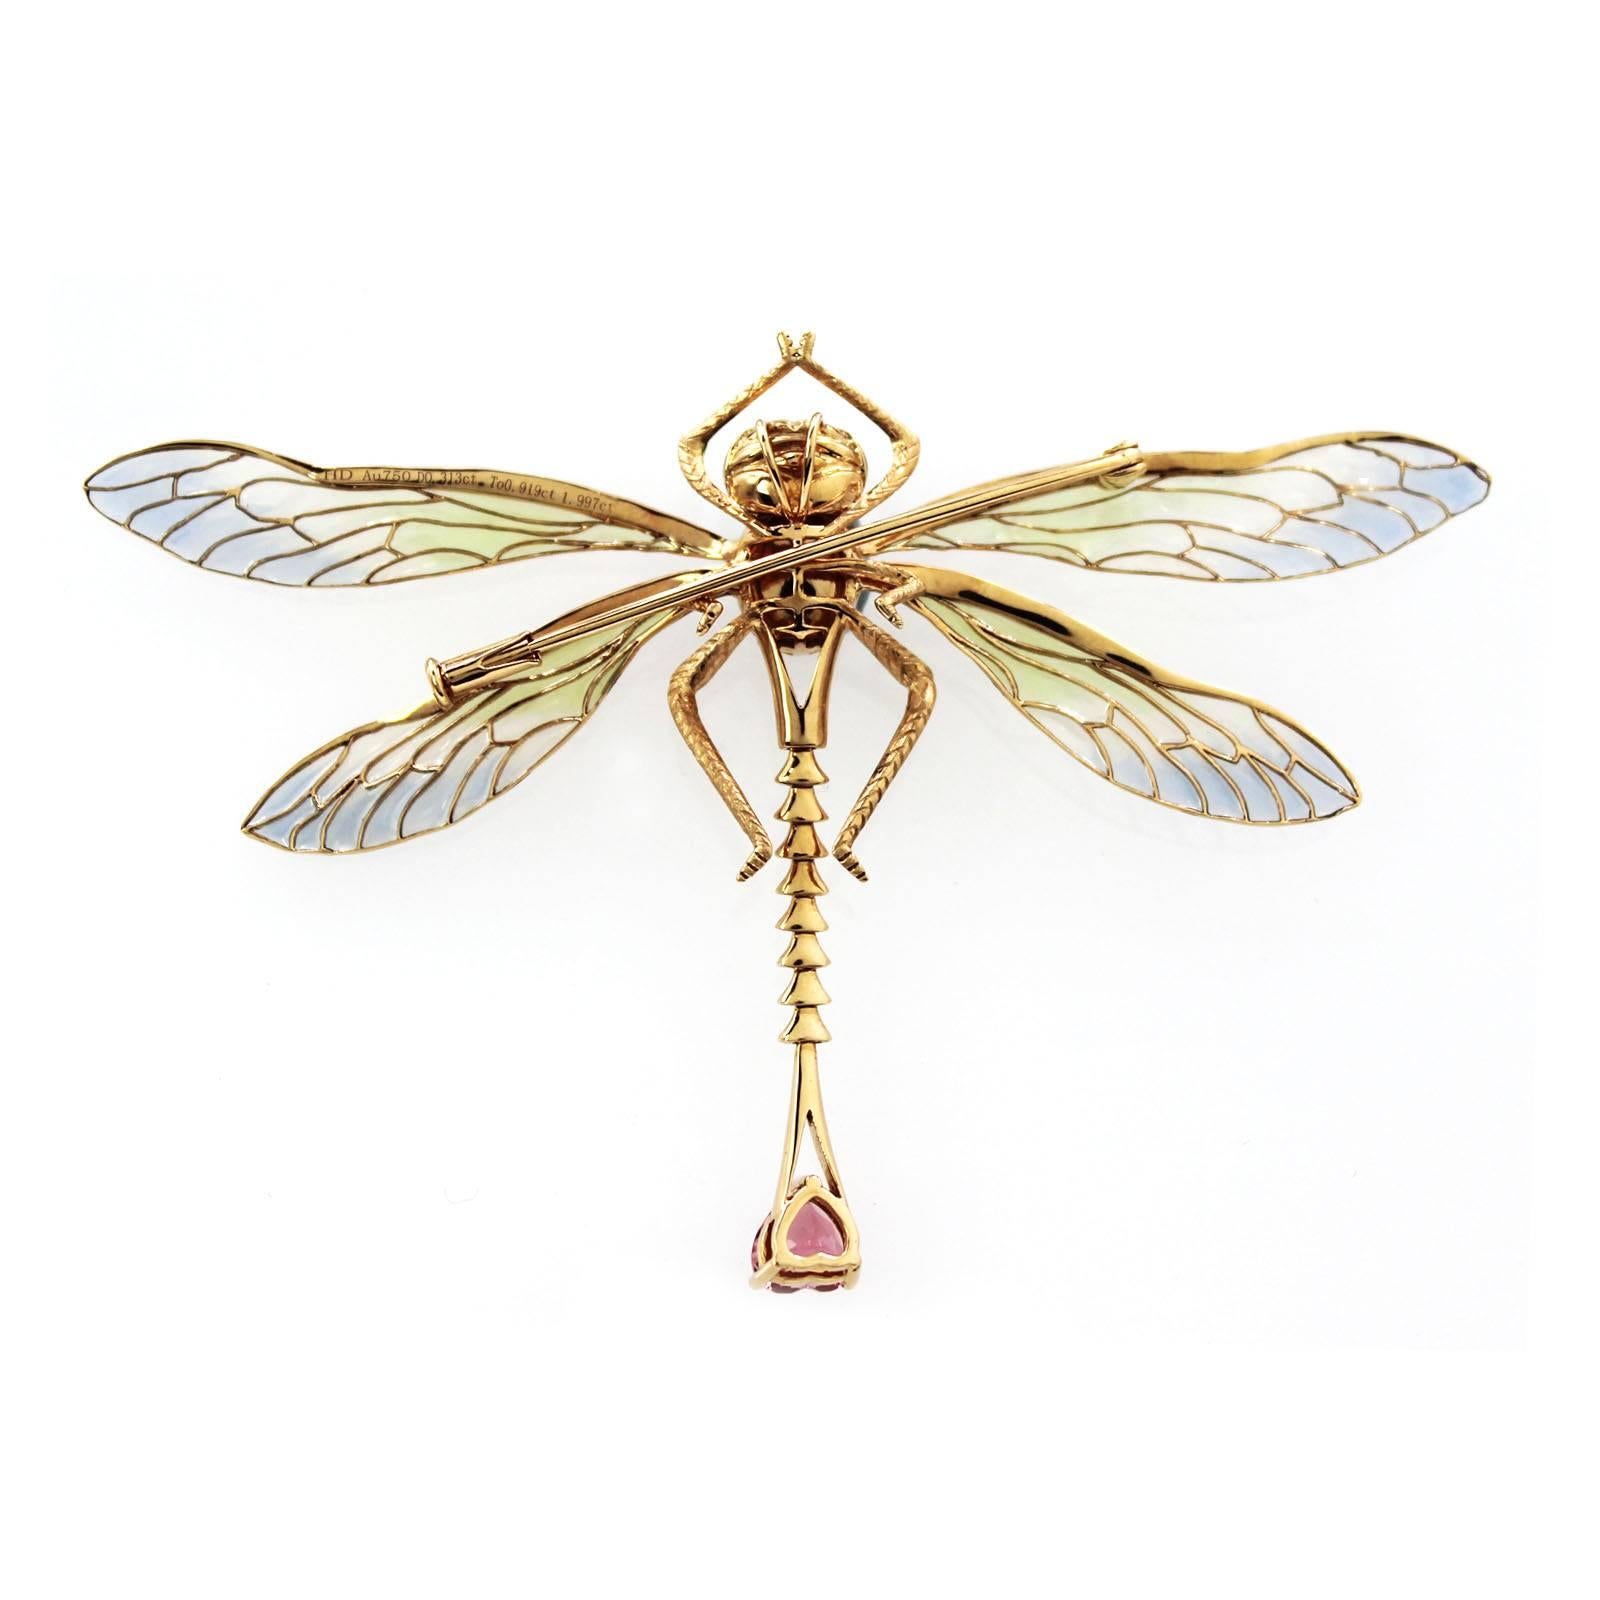 A beautiful large dragonfly brooch, which also can be worn as a pendant. Made in 18k gold, set with multi gems, garnet body, tourmaline tail, and diamonds all around. Wings made by transparent enamel. 

Lots of details on the pieces front as well